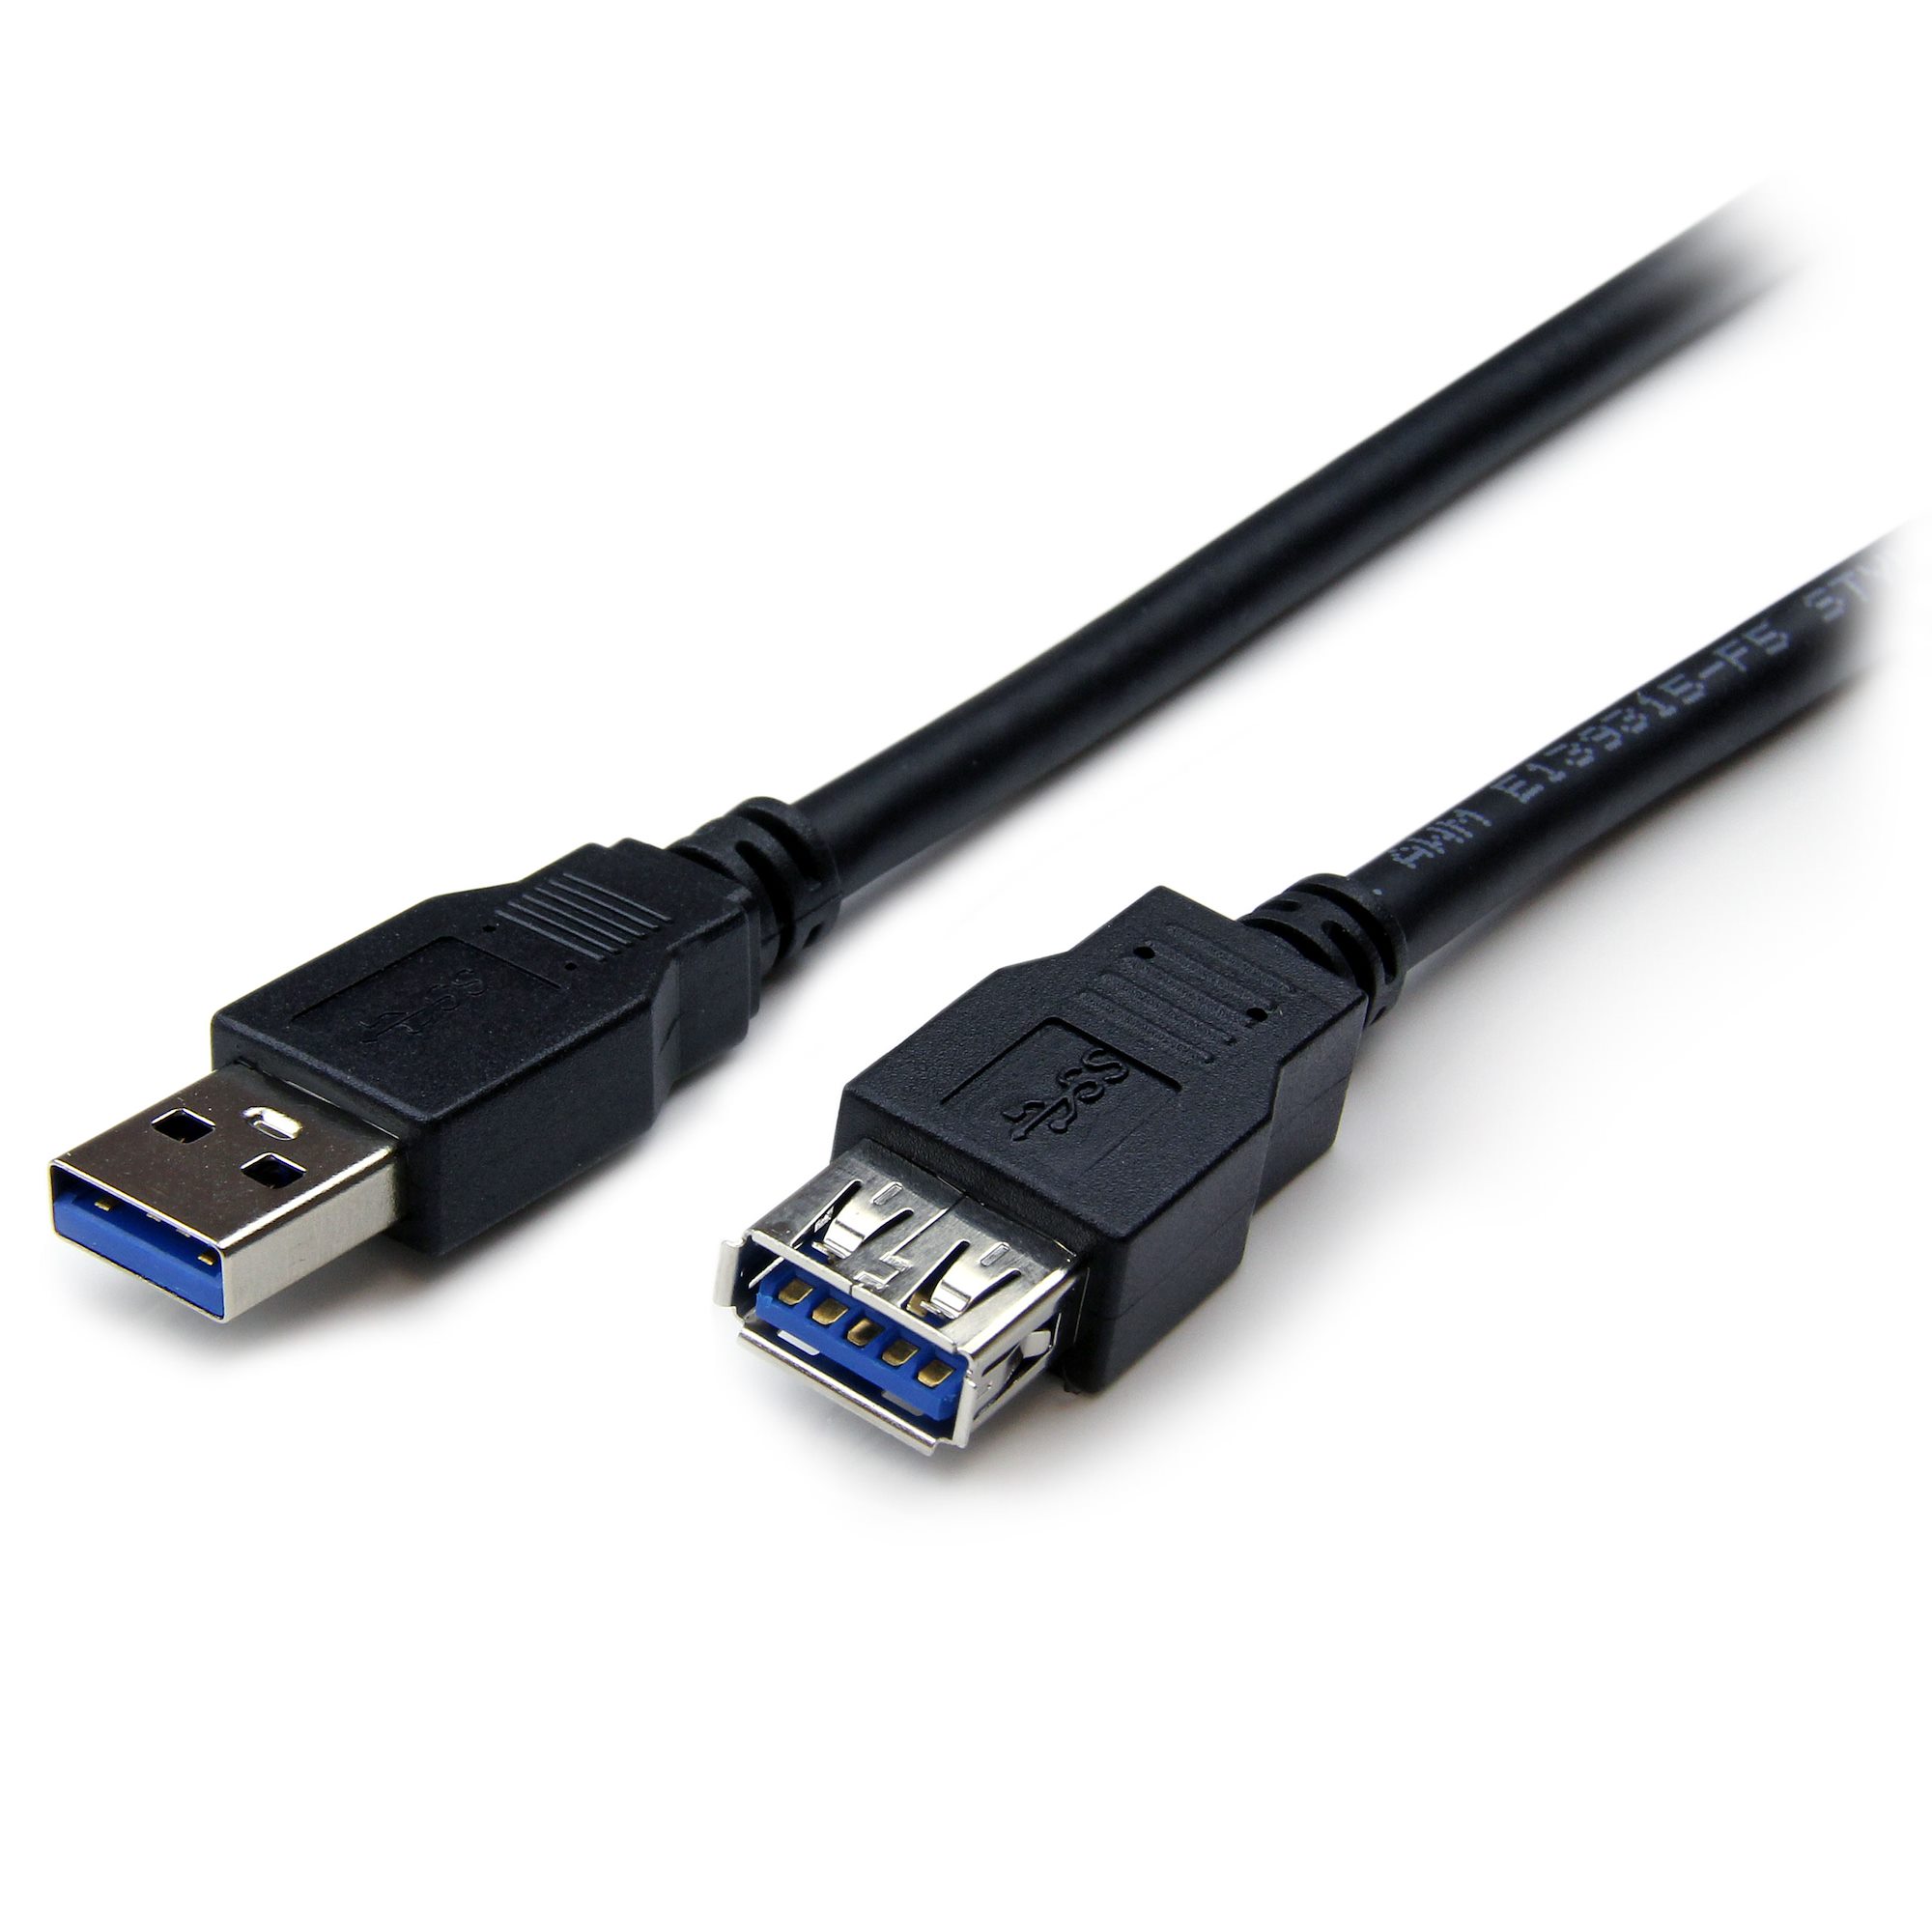 KabelDirekt – USB A 3.0 Extension Cable – 6 inches – (Connect USB